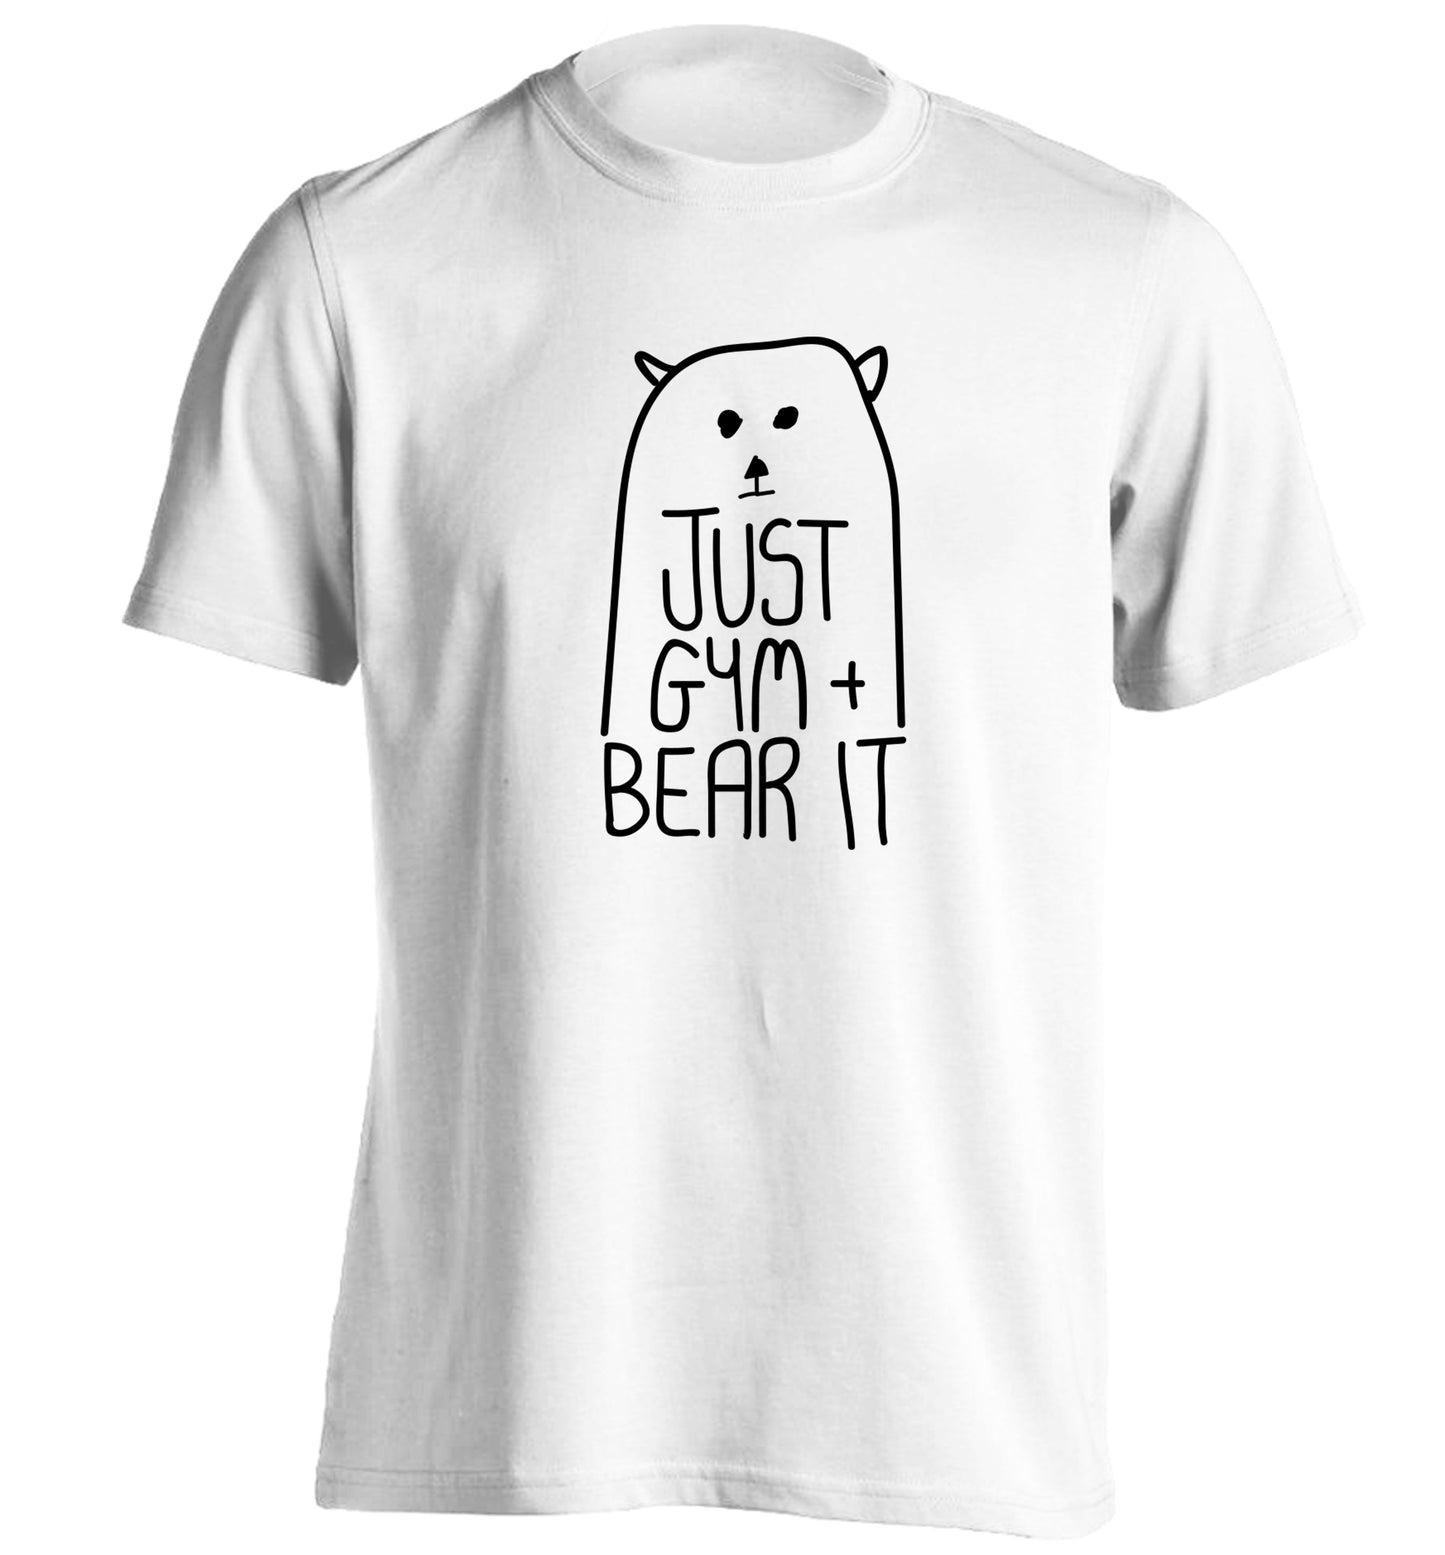 Just gym and bear it adults unisex white Tshirt 2XL